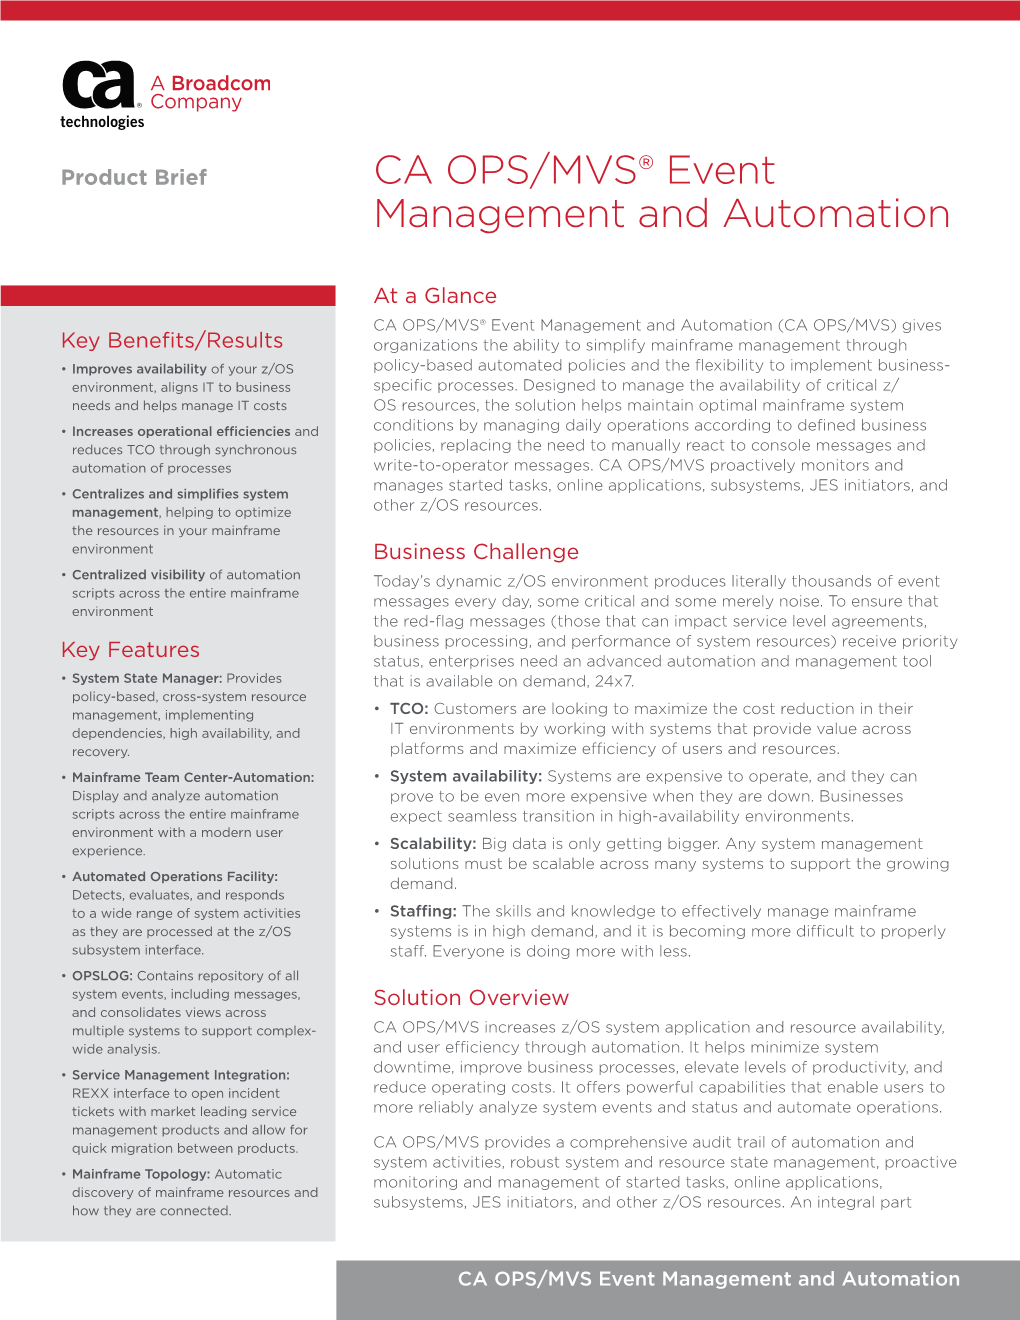 CA OPS/MVS Event Management and Automation Product Brief